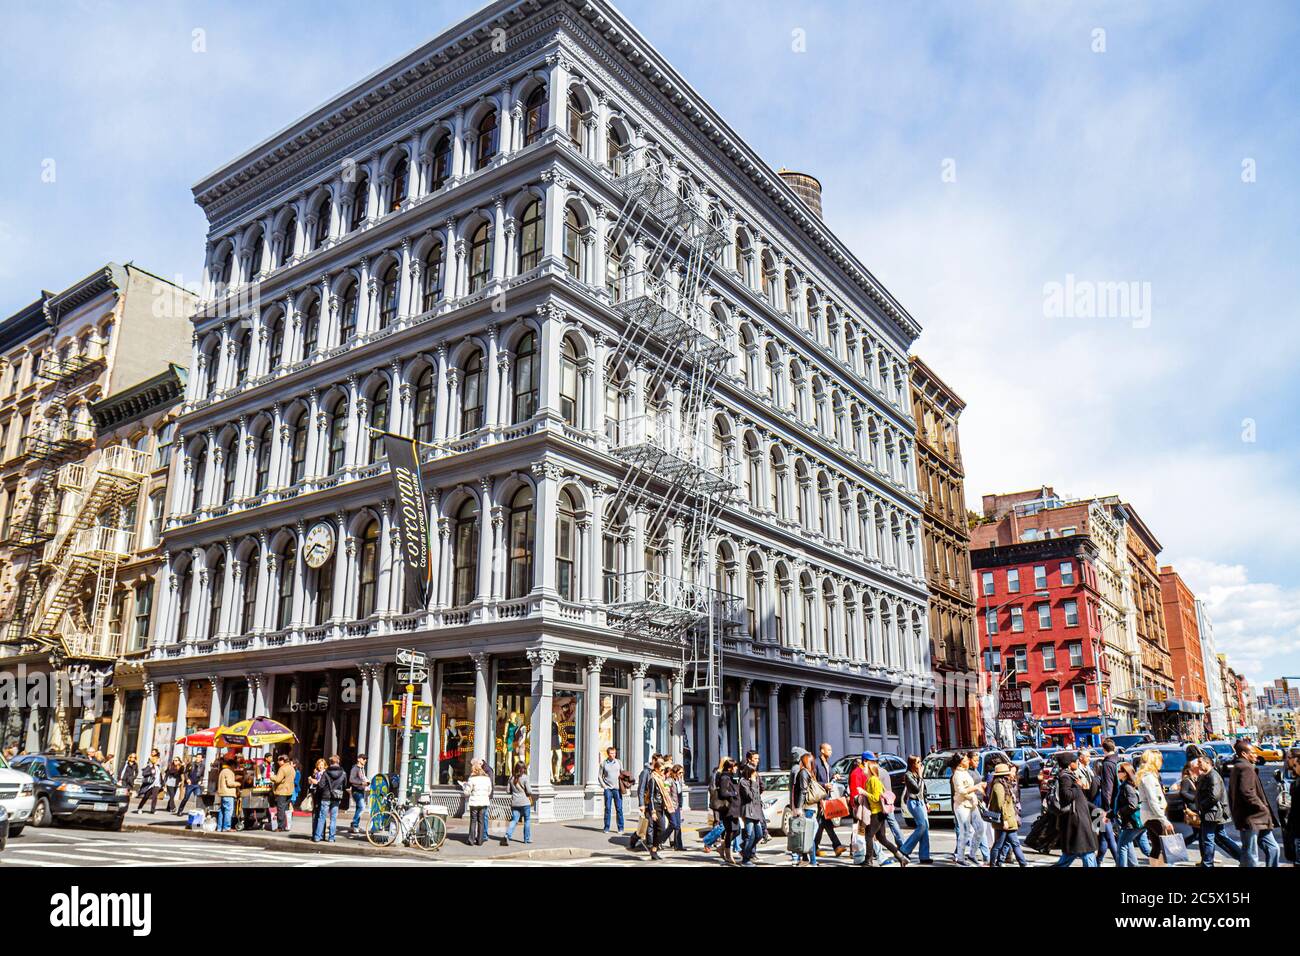 New York,New York City,NYC,Lower,Manhattan,SoHo,Cast Iron Historic District,architecture,architectural,Broome Street,Broadway,Haughwout building,crowd Stock Photo